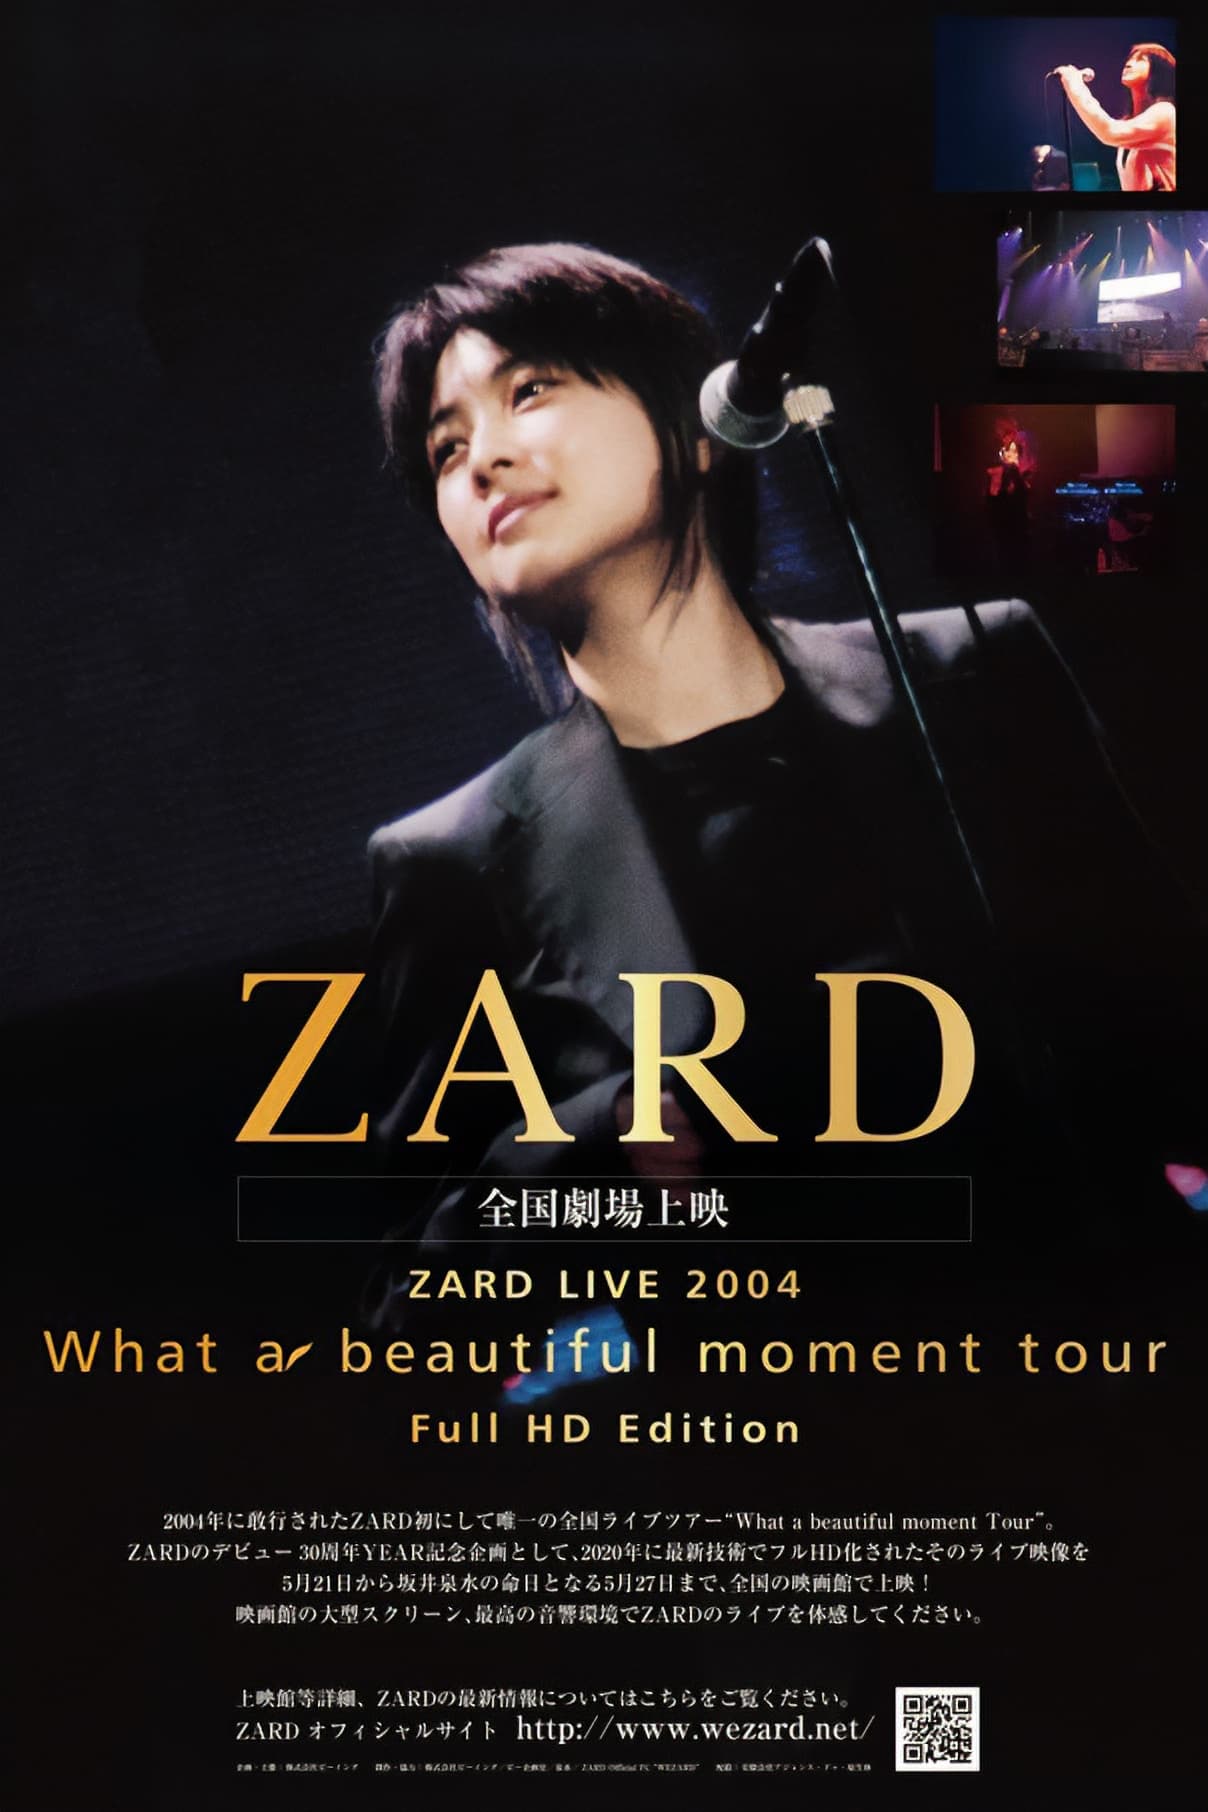 ZARD LIVE 2004“What a beautiful moment”（Full HD Edition）